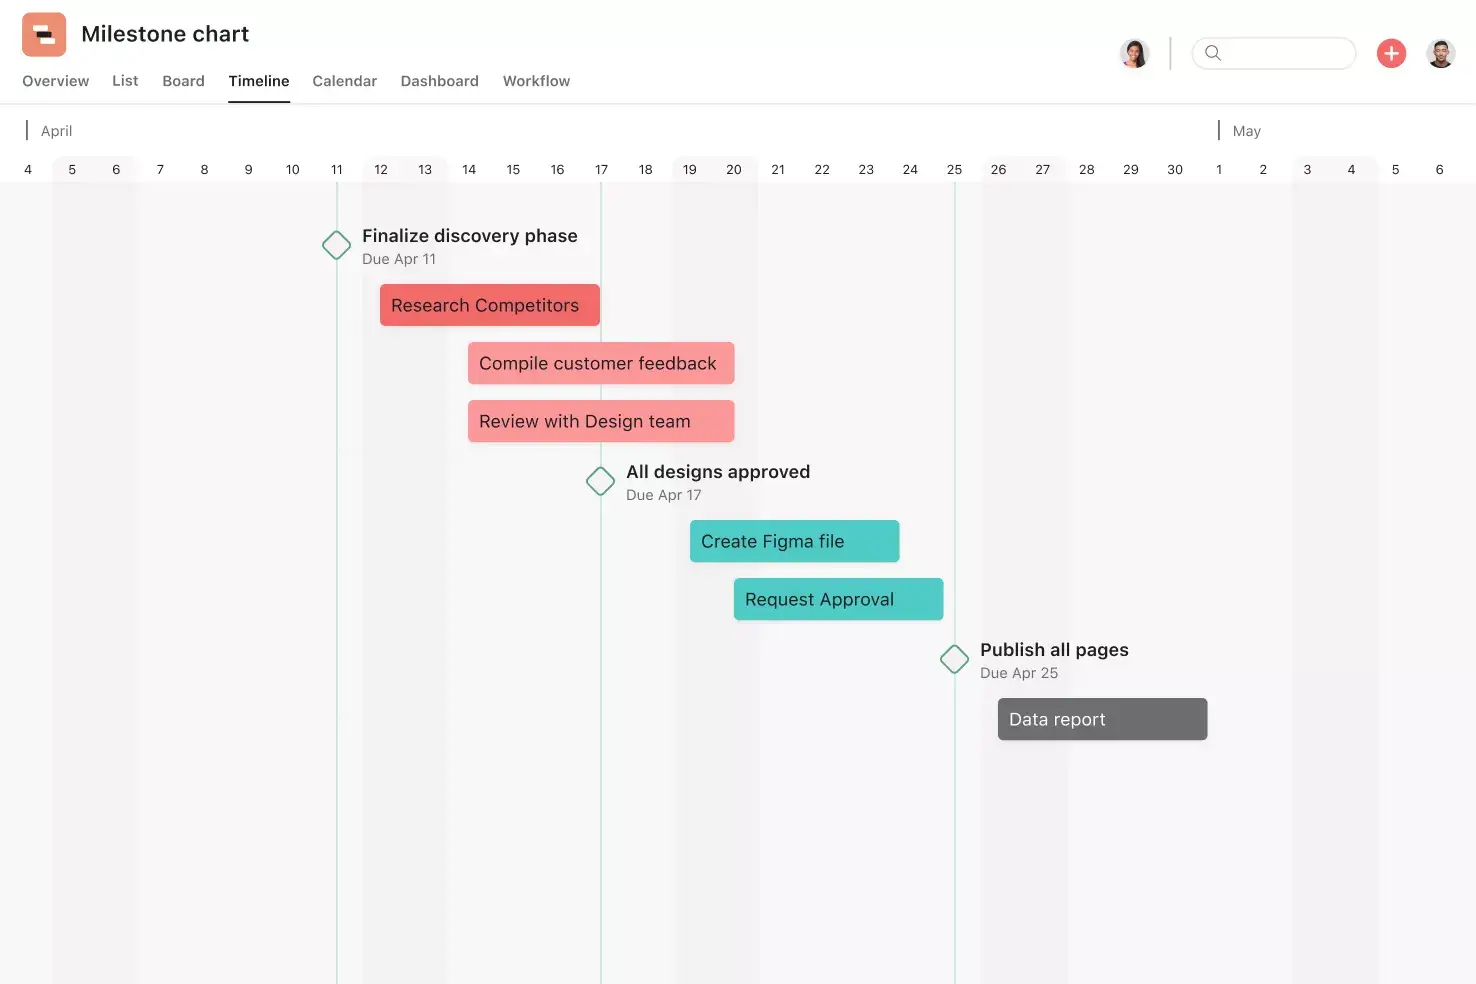 [product ui] milestone chart template in Asana (timeline view)